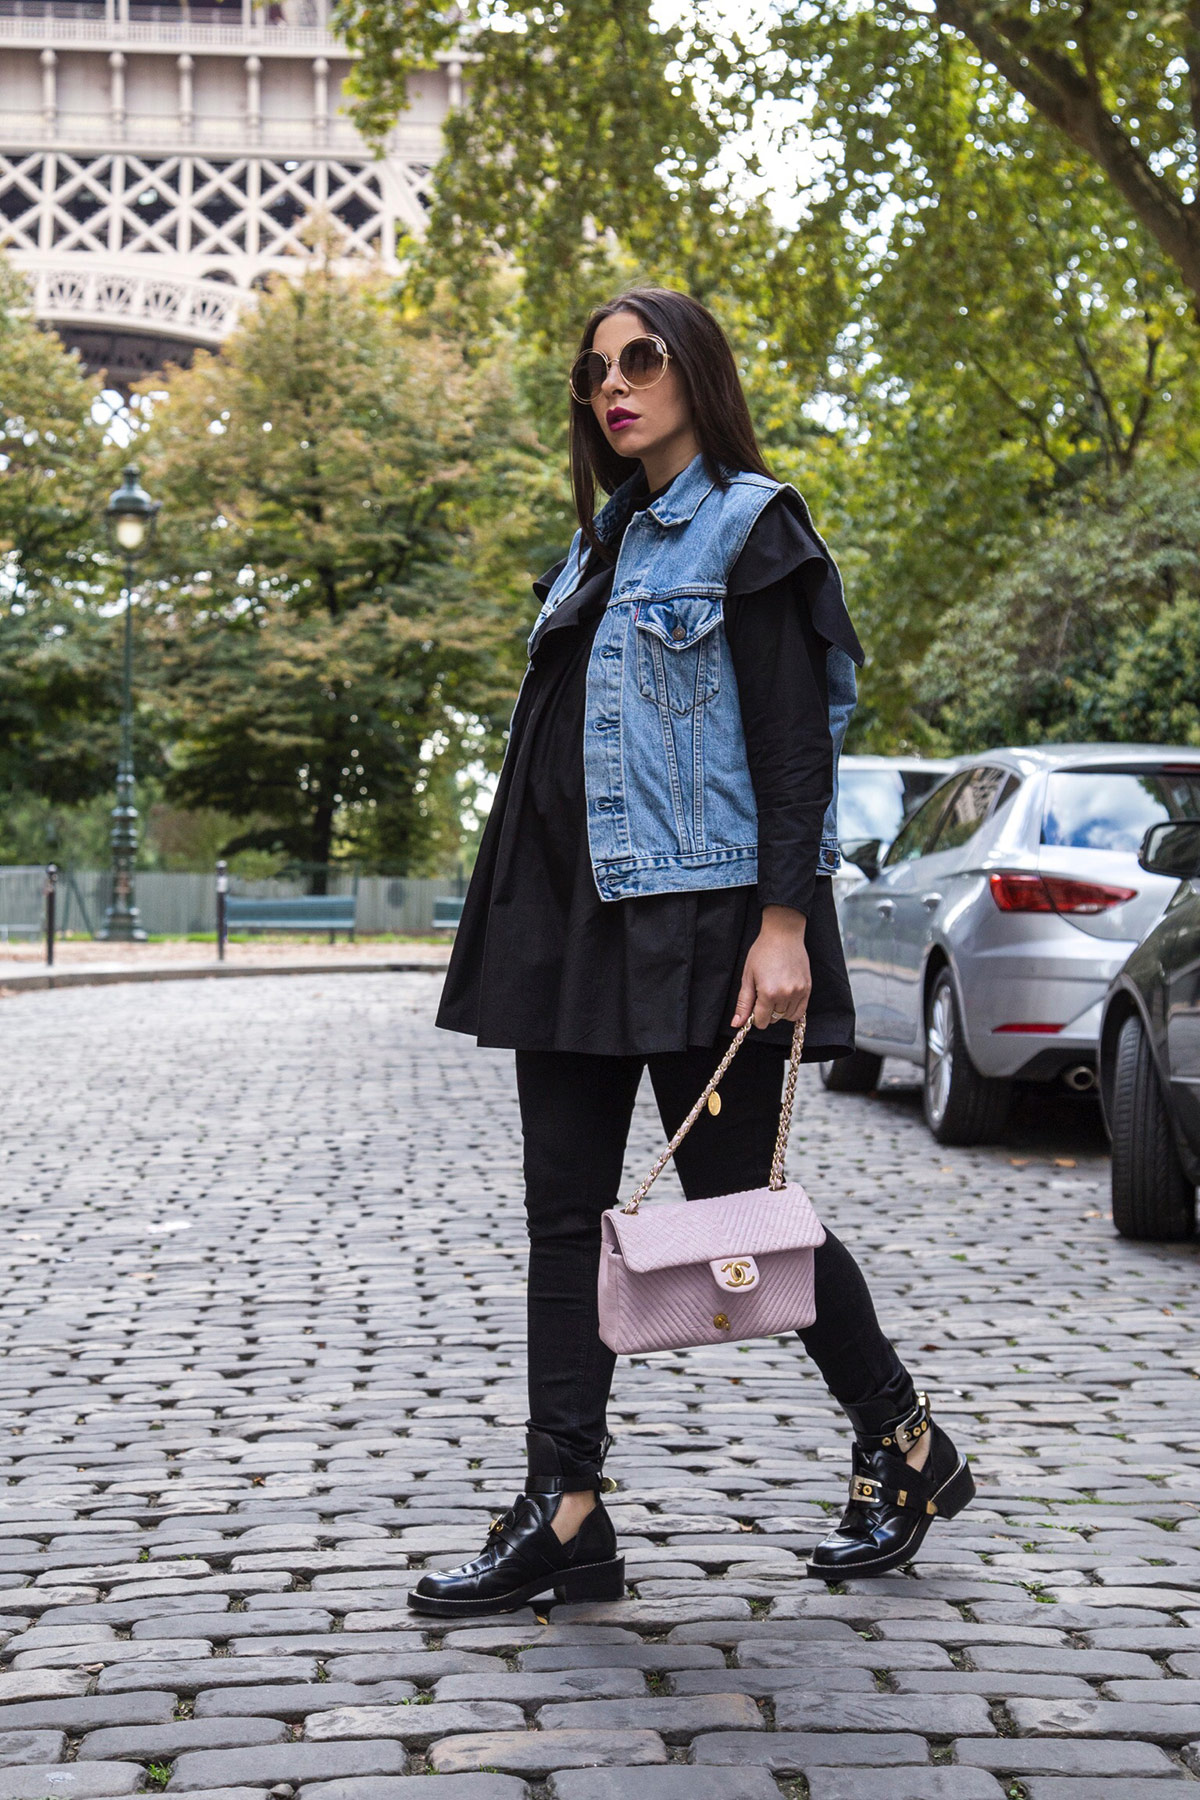 off-duty total black look with a pop of color by Stella Asteria - Lifestyle and Fashion Blogger - Paris Street Style inspiration, pregnancy style and how to dress the bump - pink Chanel bag and Balenciaga combat boots